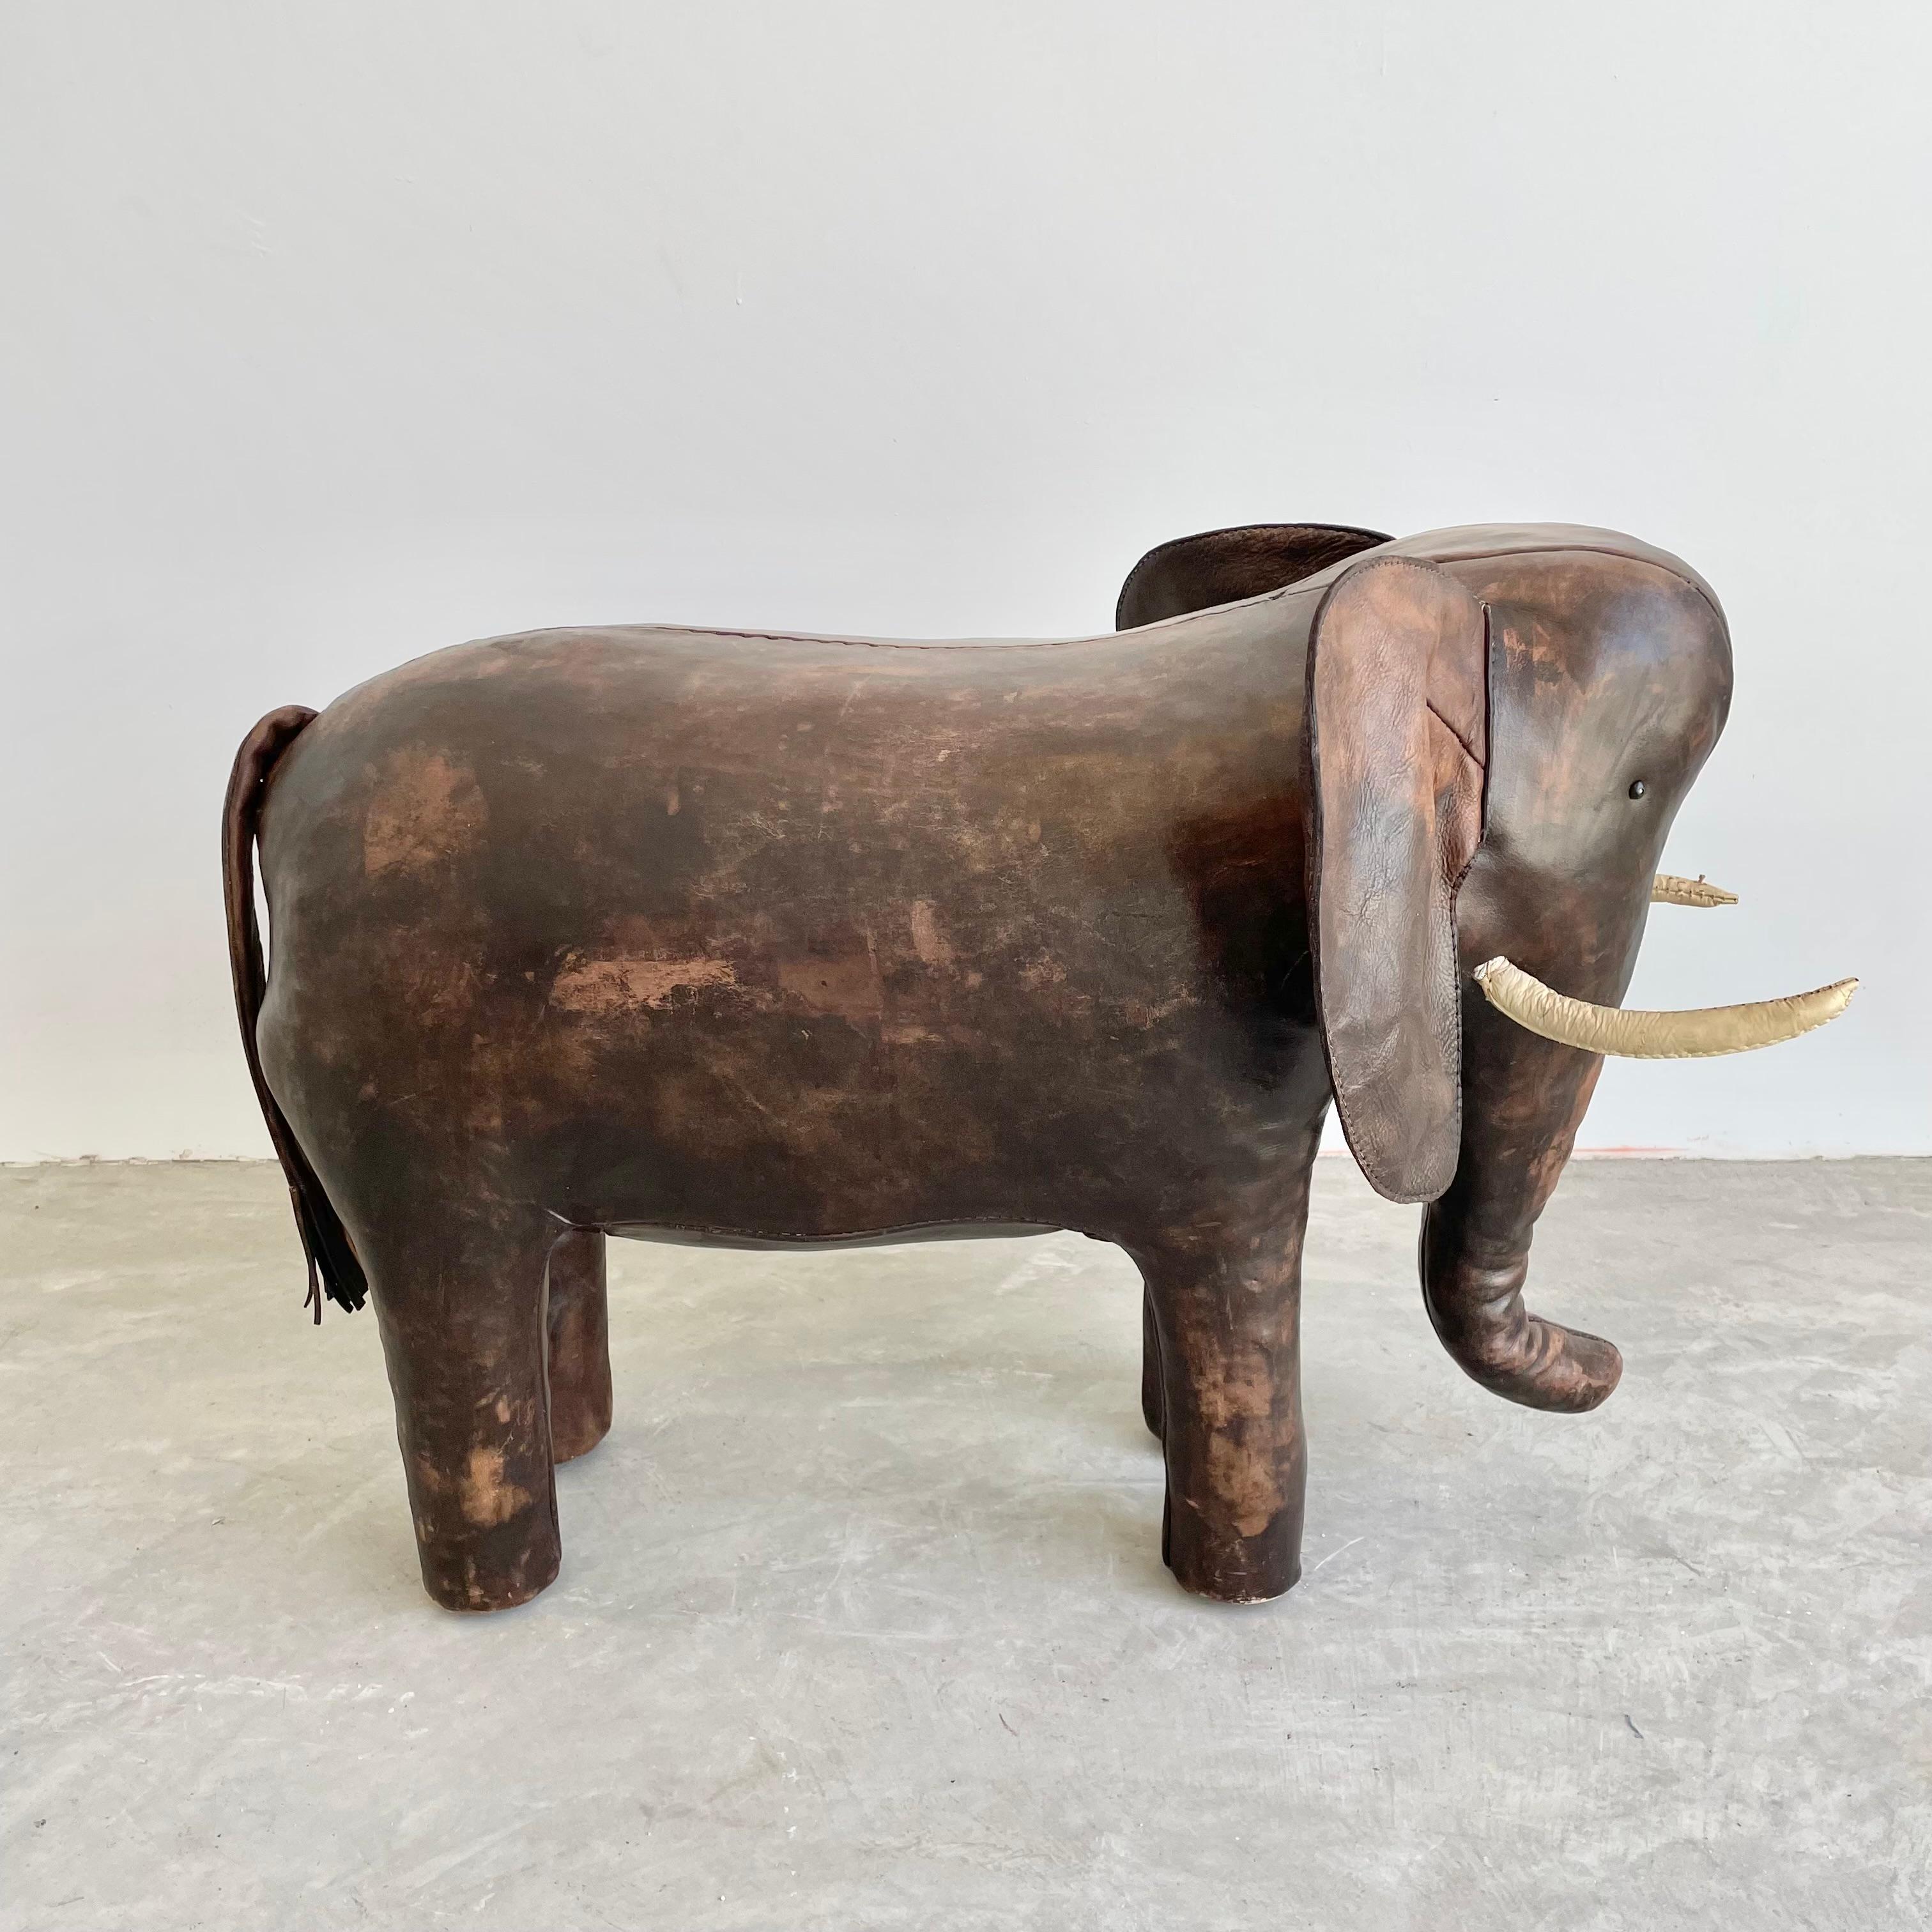 **DEPOSIT TWO**
Rare leather elephant by Omersa. Heavy, functional stool, strong enough for an adult. Made in England, Circa 1960s. Beautiful vintage coloring and patina. Wear as shown. Great sculptural seat. Fun piece of usable art for the home.